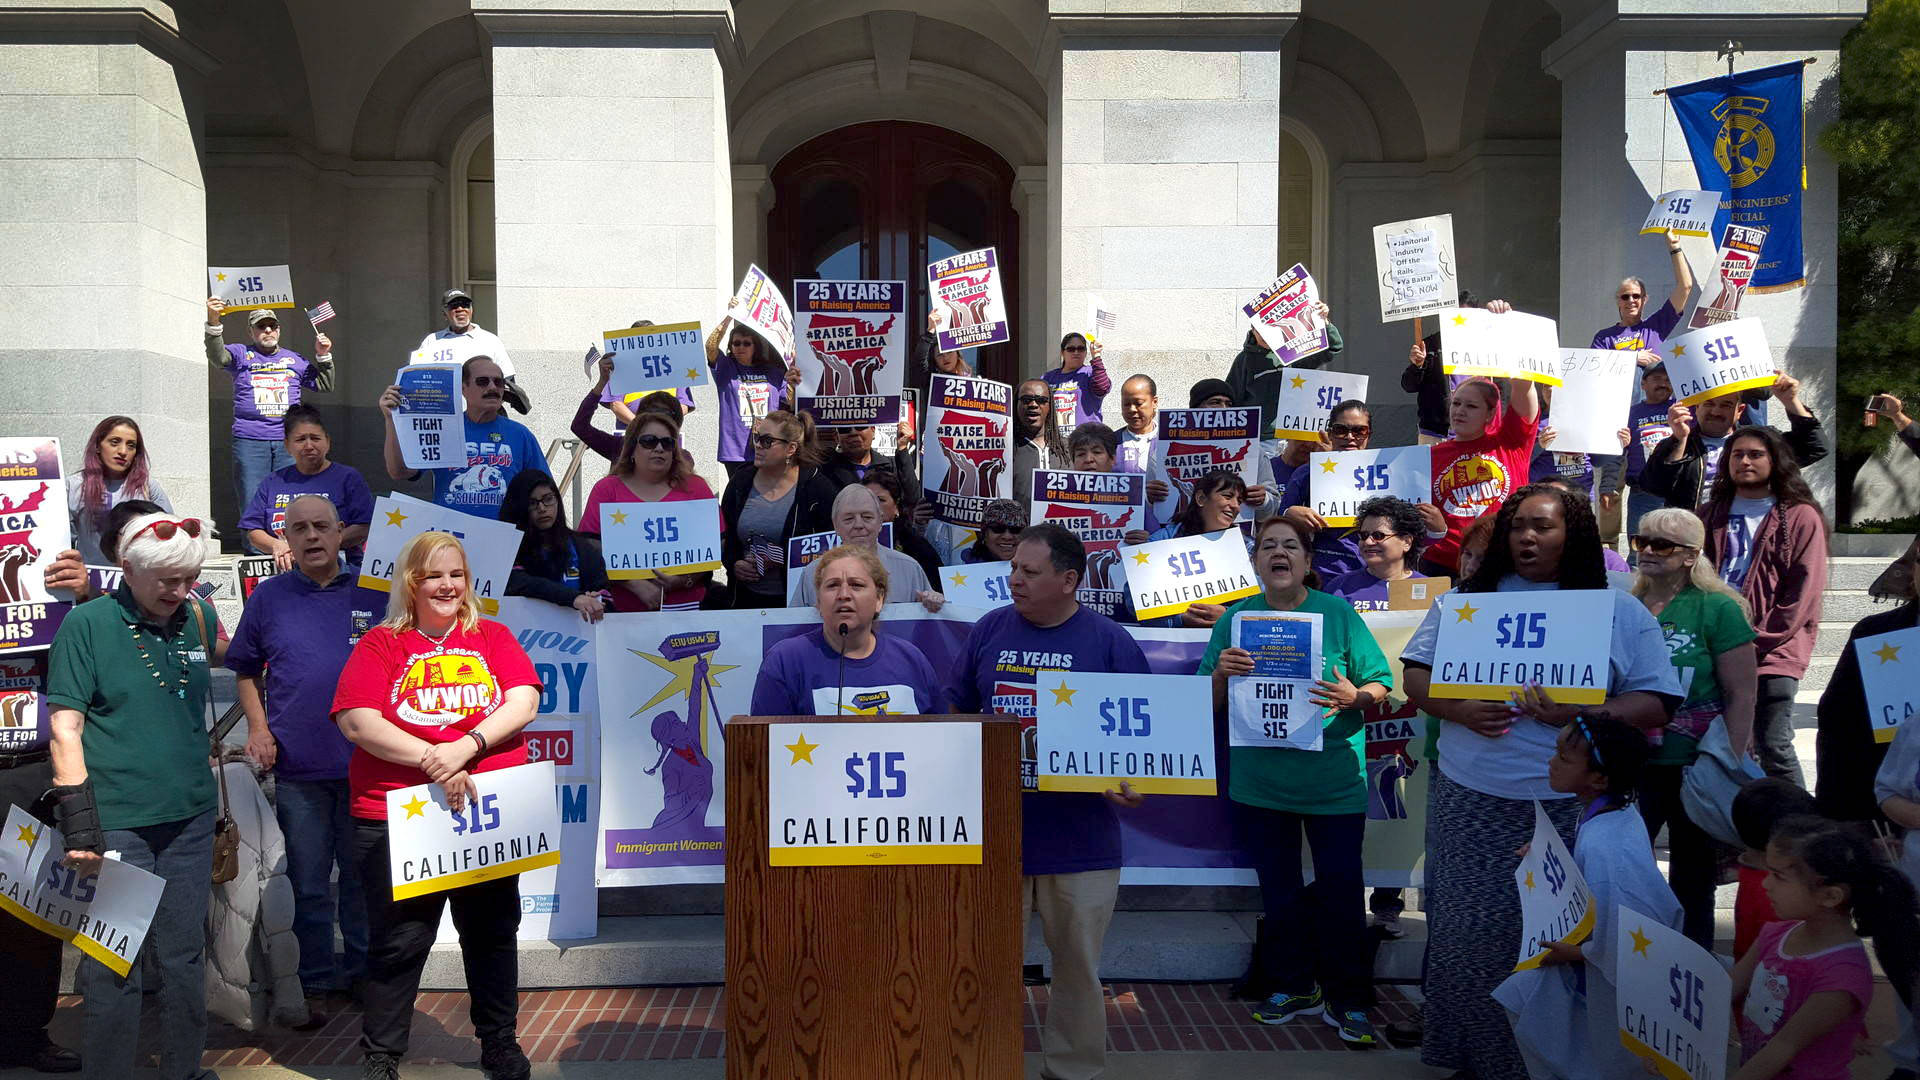 Supporters of a $15 per hour minimum wage rally outside the state Capitol in Sacramento on March 31, 2016. Katie Orr/KQED